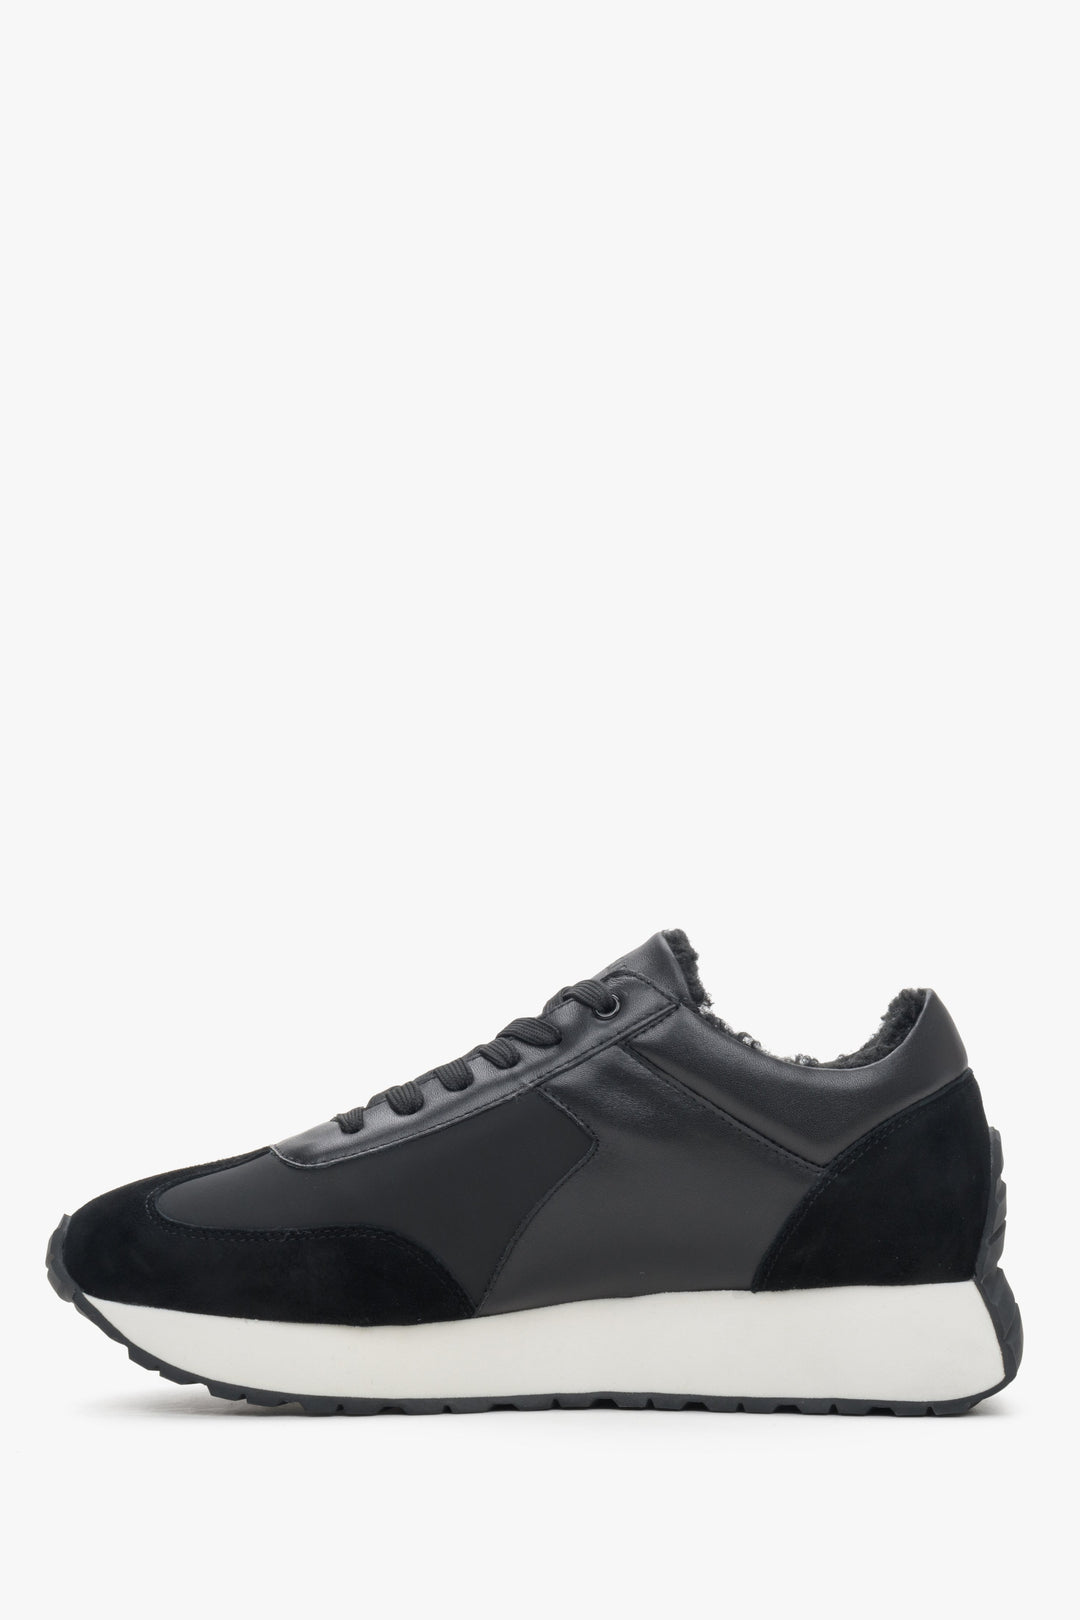 Winter women's sneakers in black made of leather and velvet by Estro - side view of the shoe.